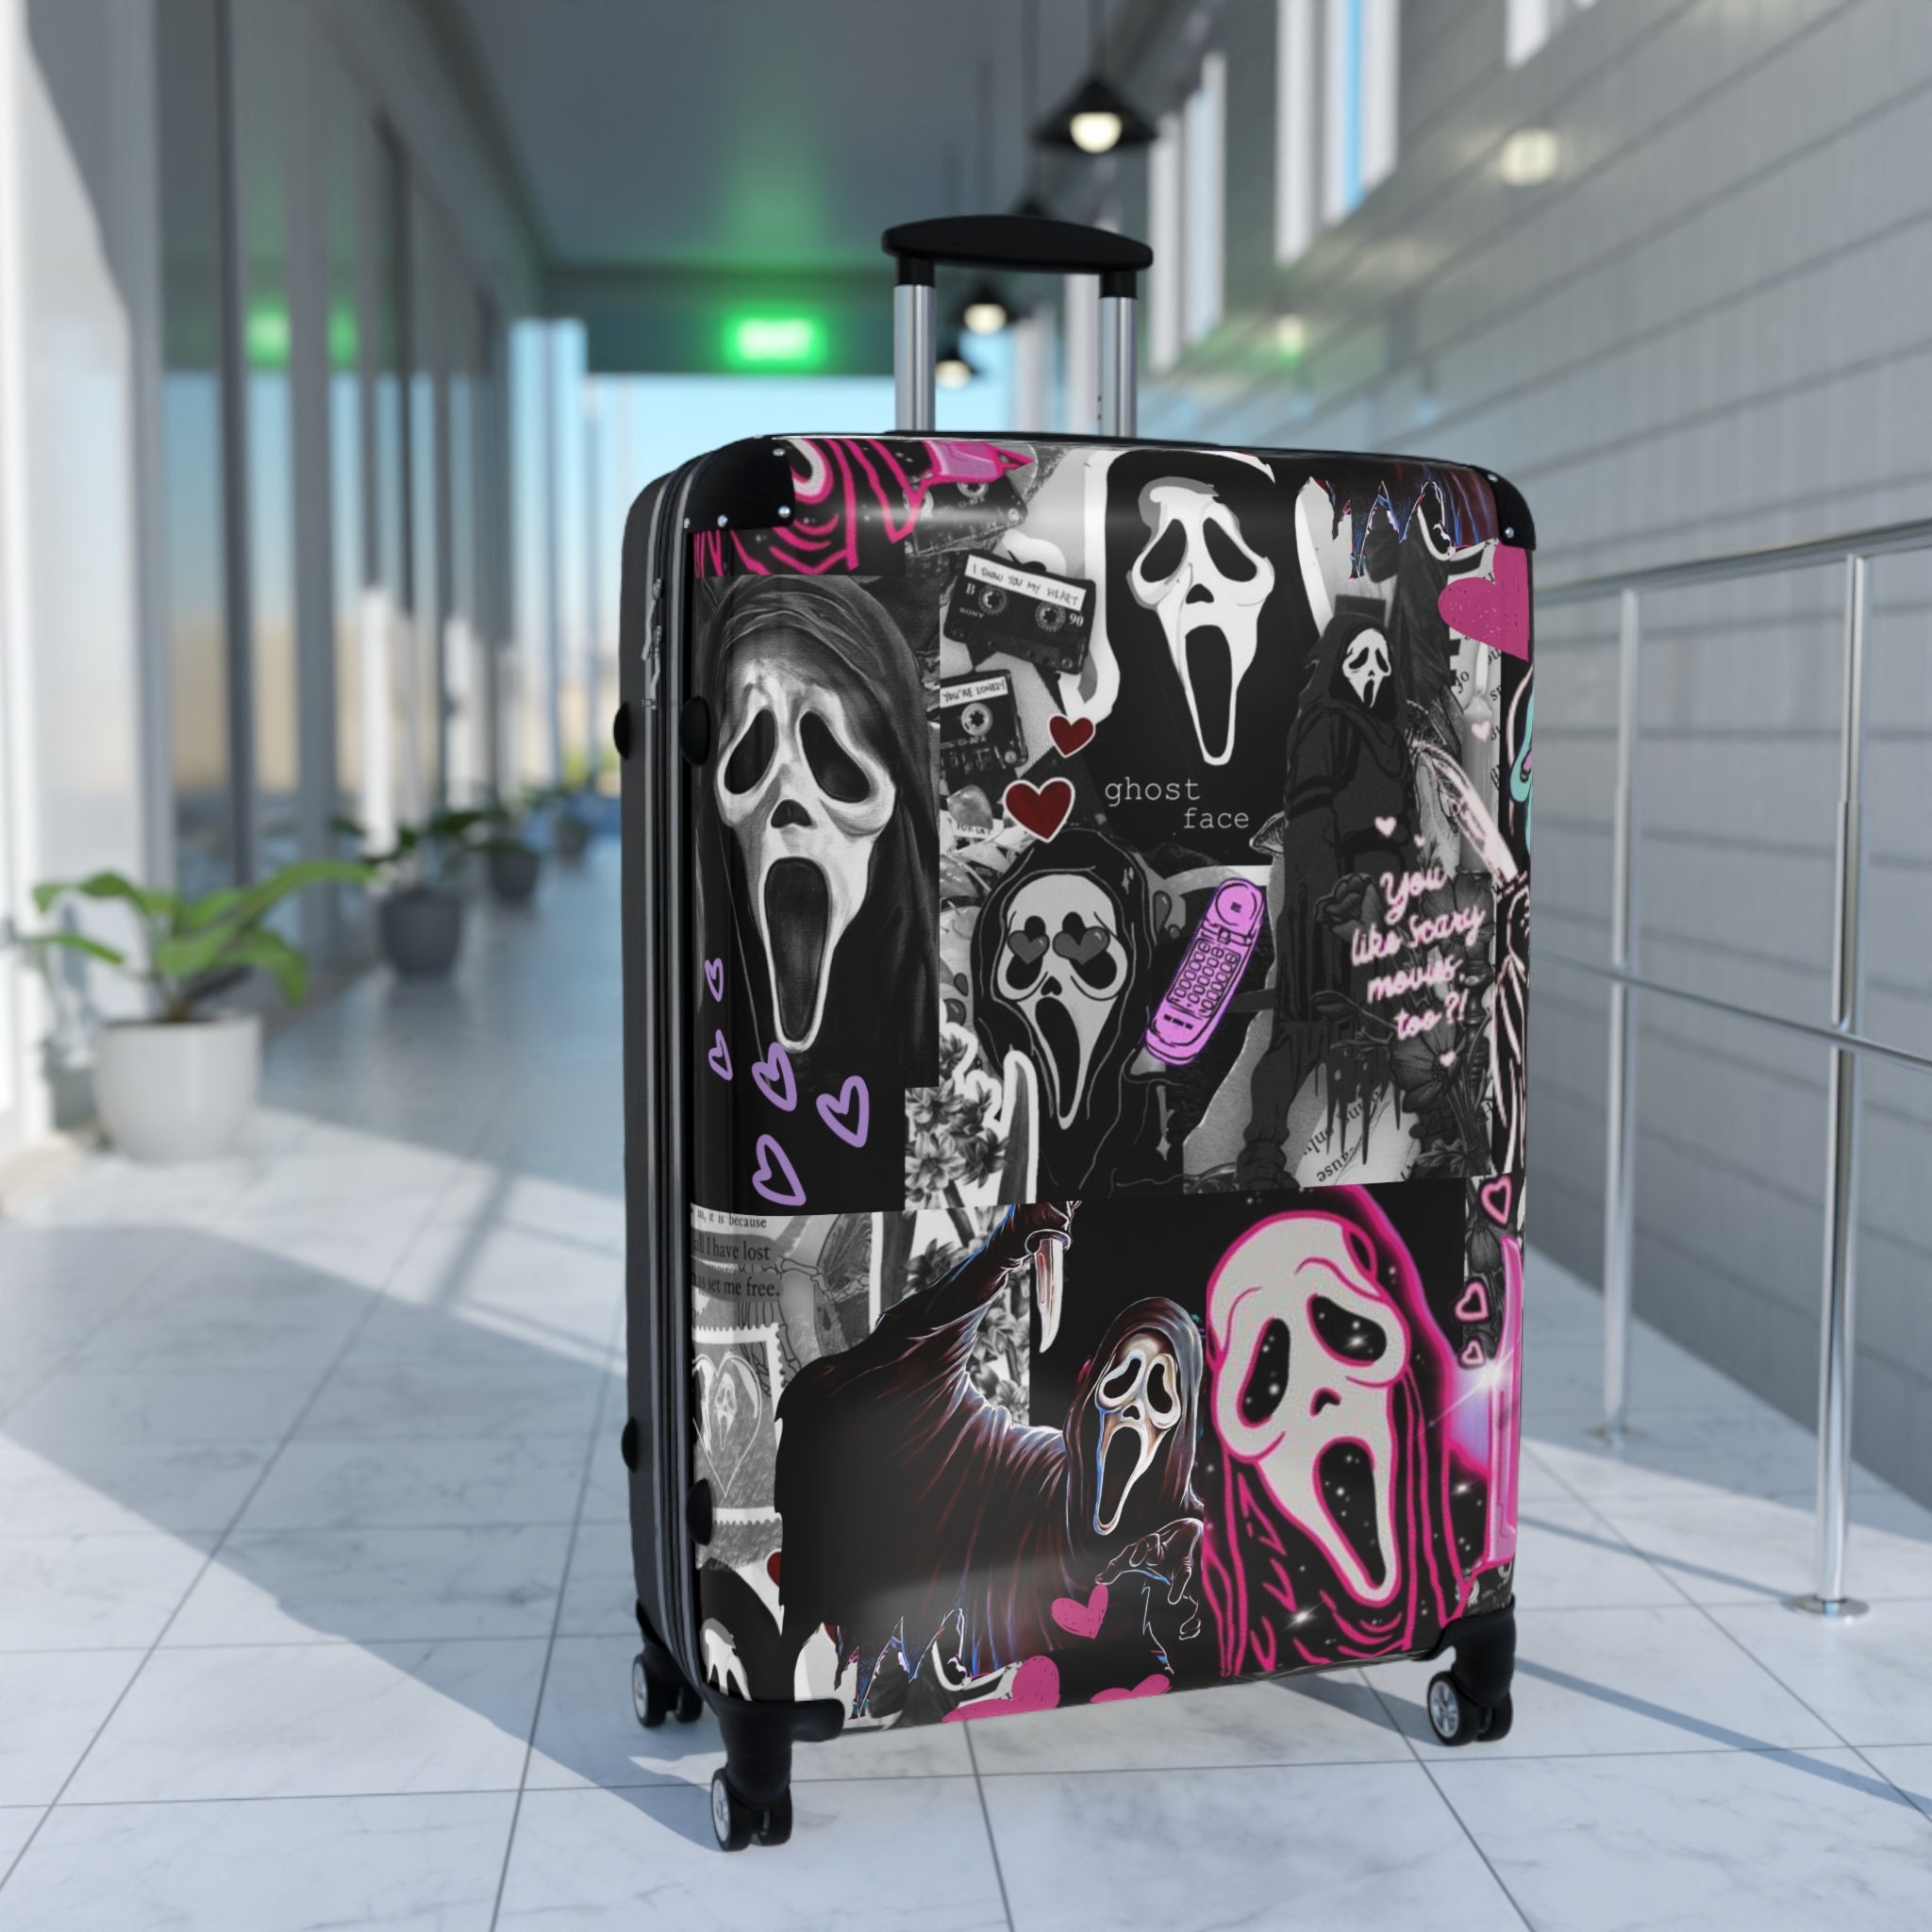 Luggage Cover Travel Suitcase Cover Protector,Halloween Cartoon Cat Ghost  Grey Luggage Covers for Suitcase Fits 29-32 Inch Luggage,Funny Skeleton